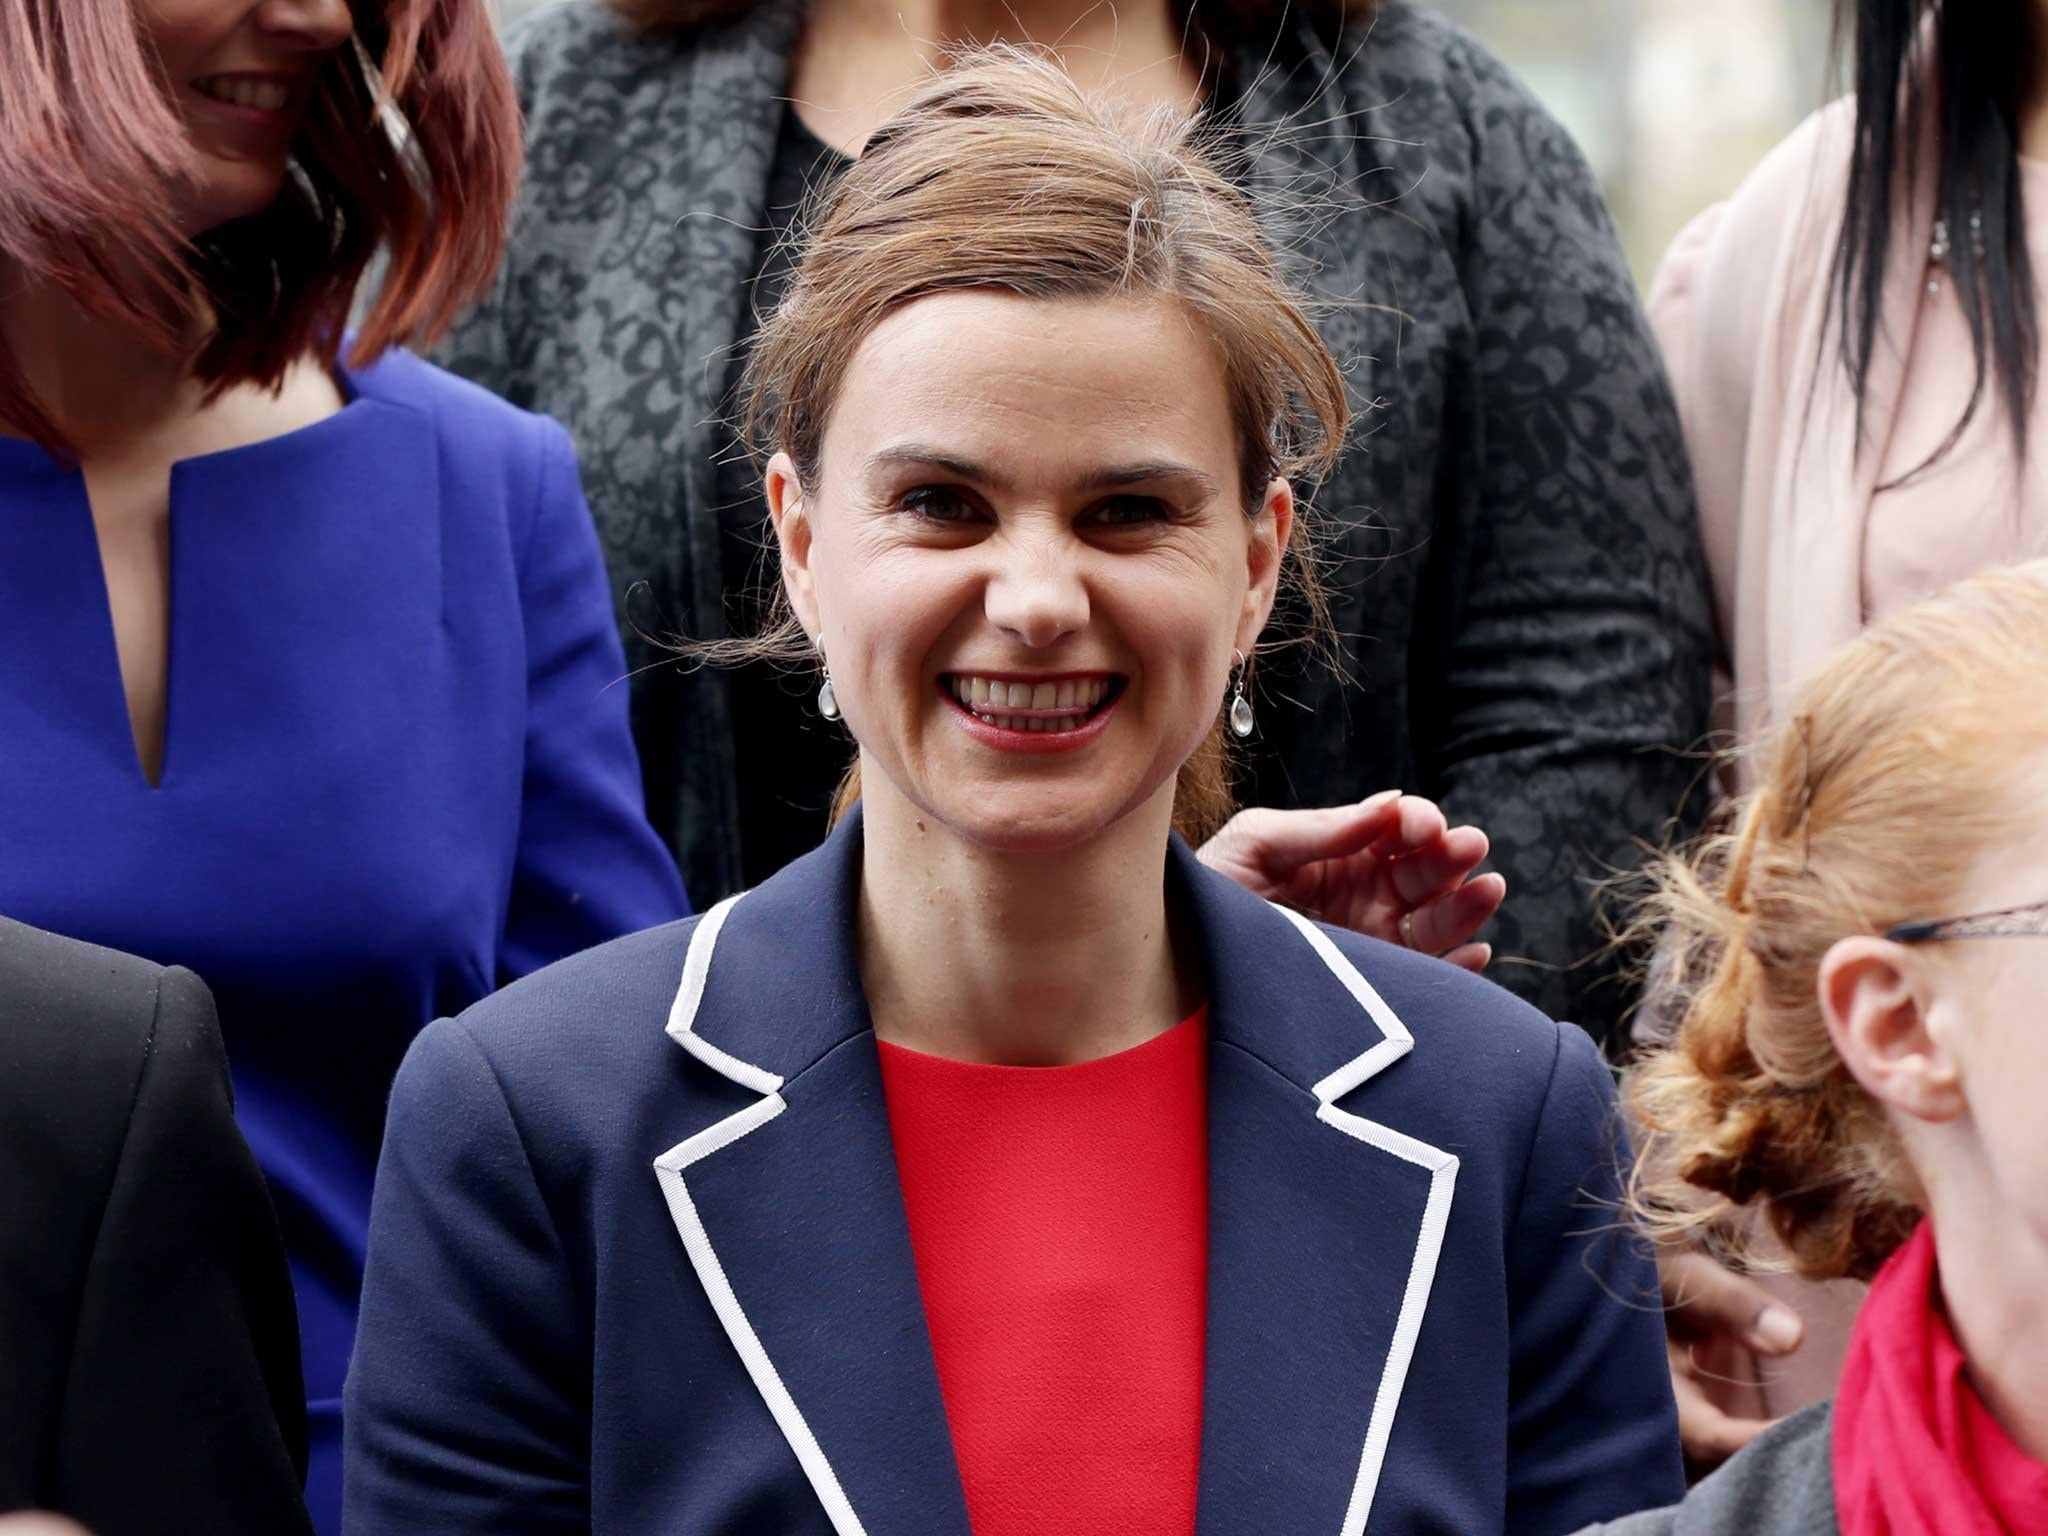 Jo Cox, the Labour MP for Batley and Spen, who died after being shot and stabbed in her constituency on Thursday